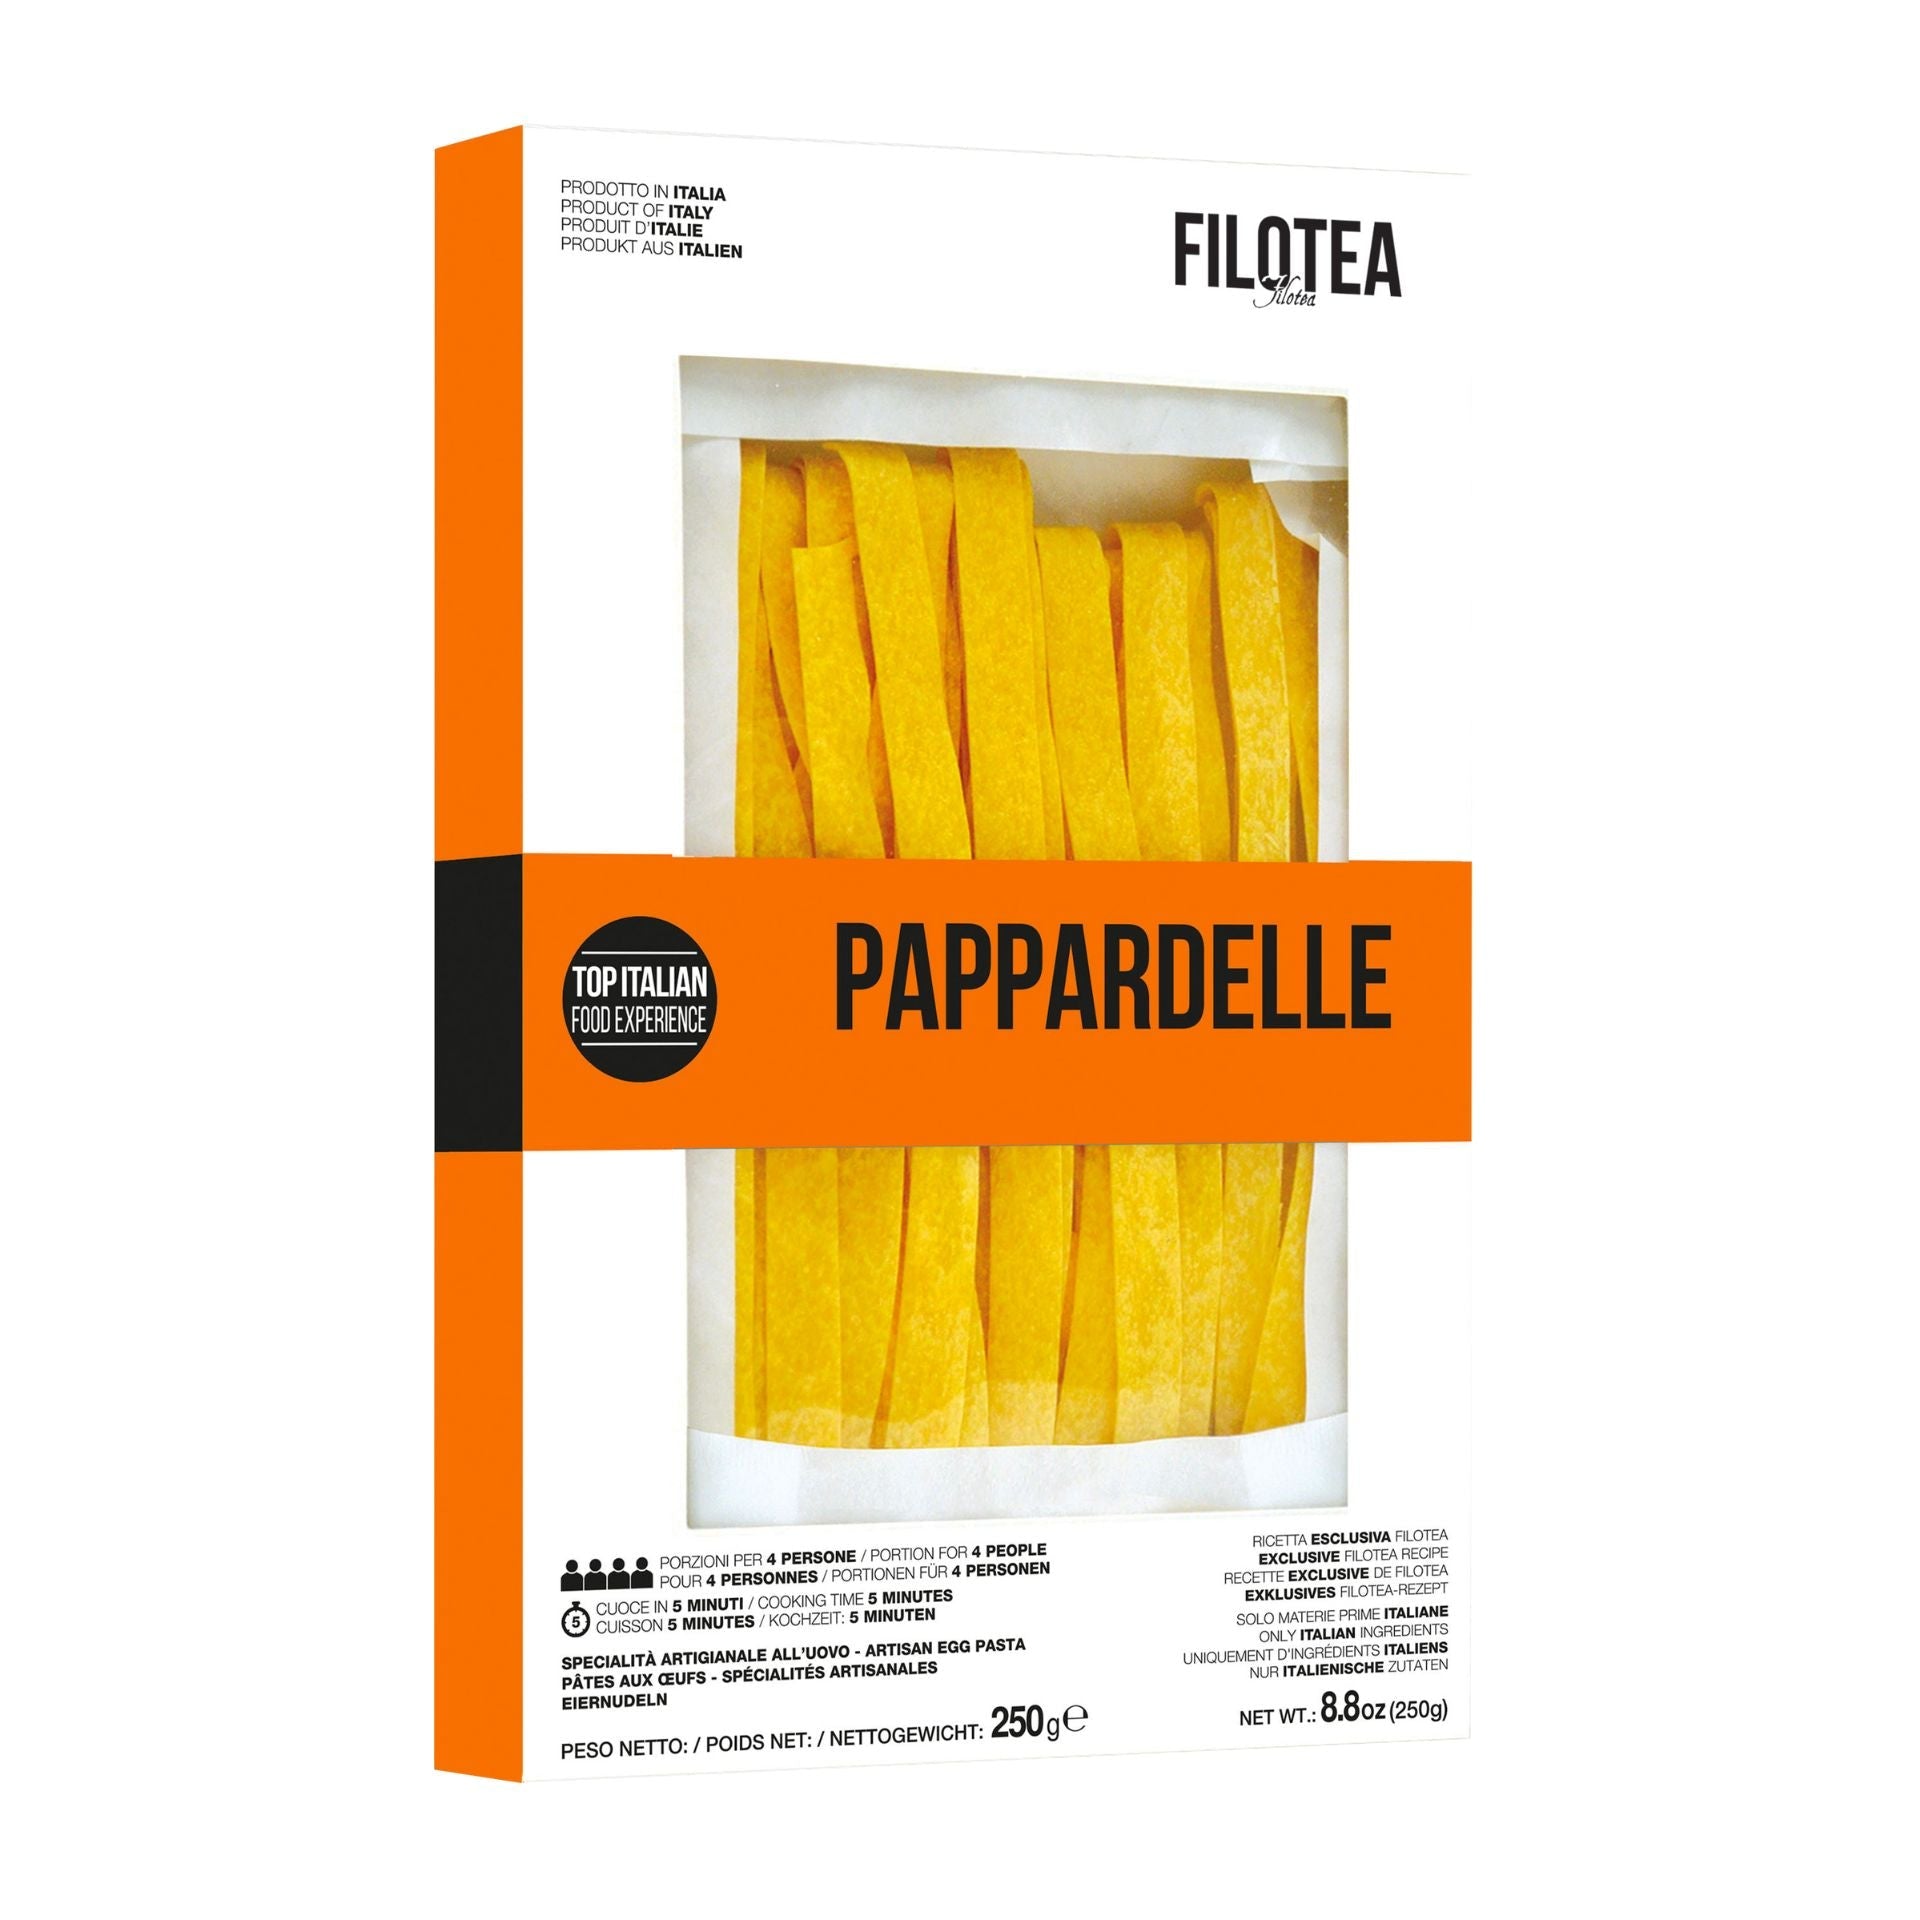 Filotea Pappardelle Artisan Egg Pasta 250g  | Imported and distributed in the UK by Just Gourmet Foods